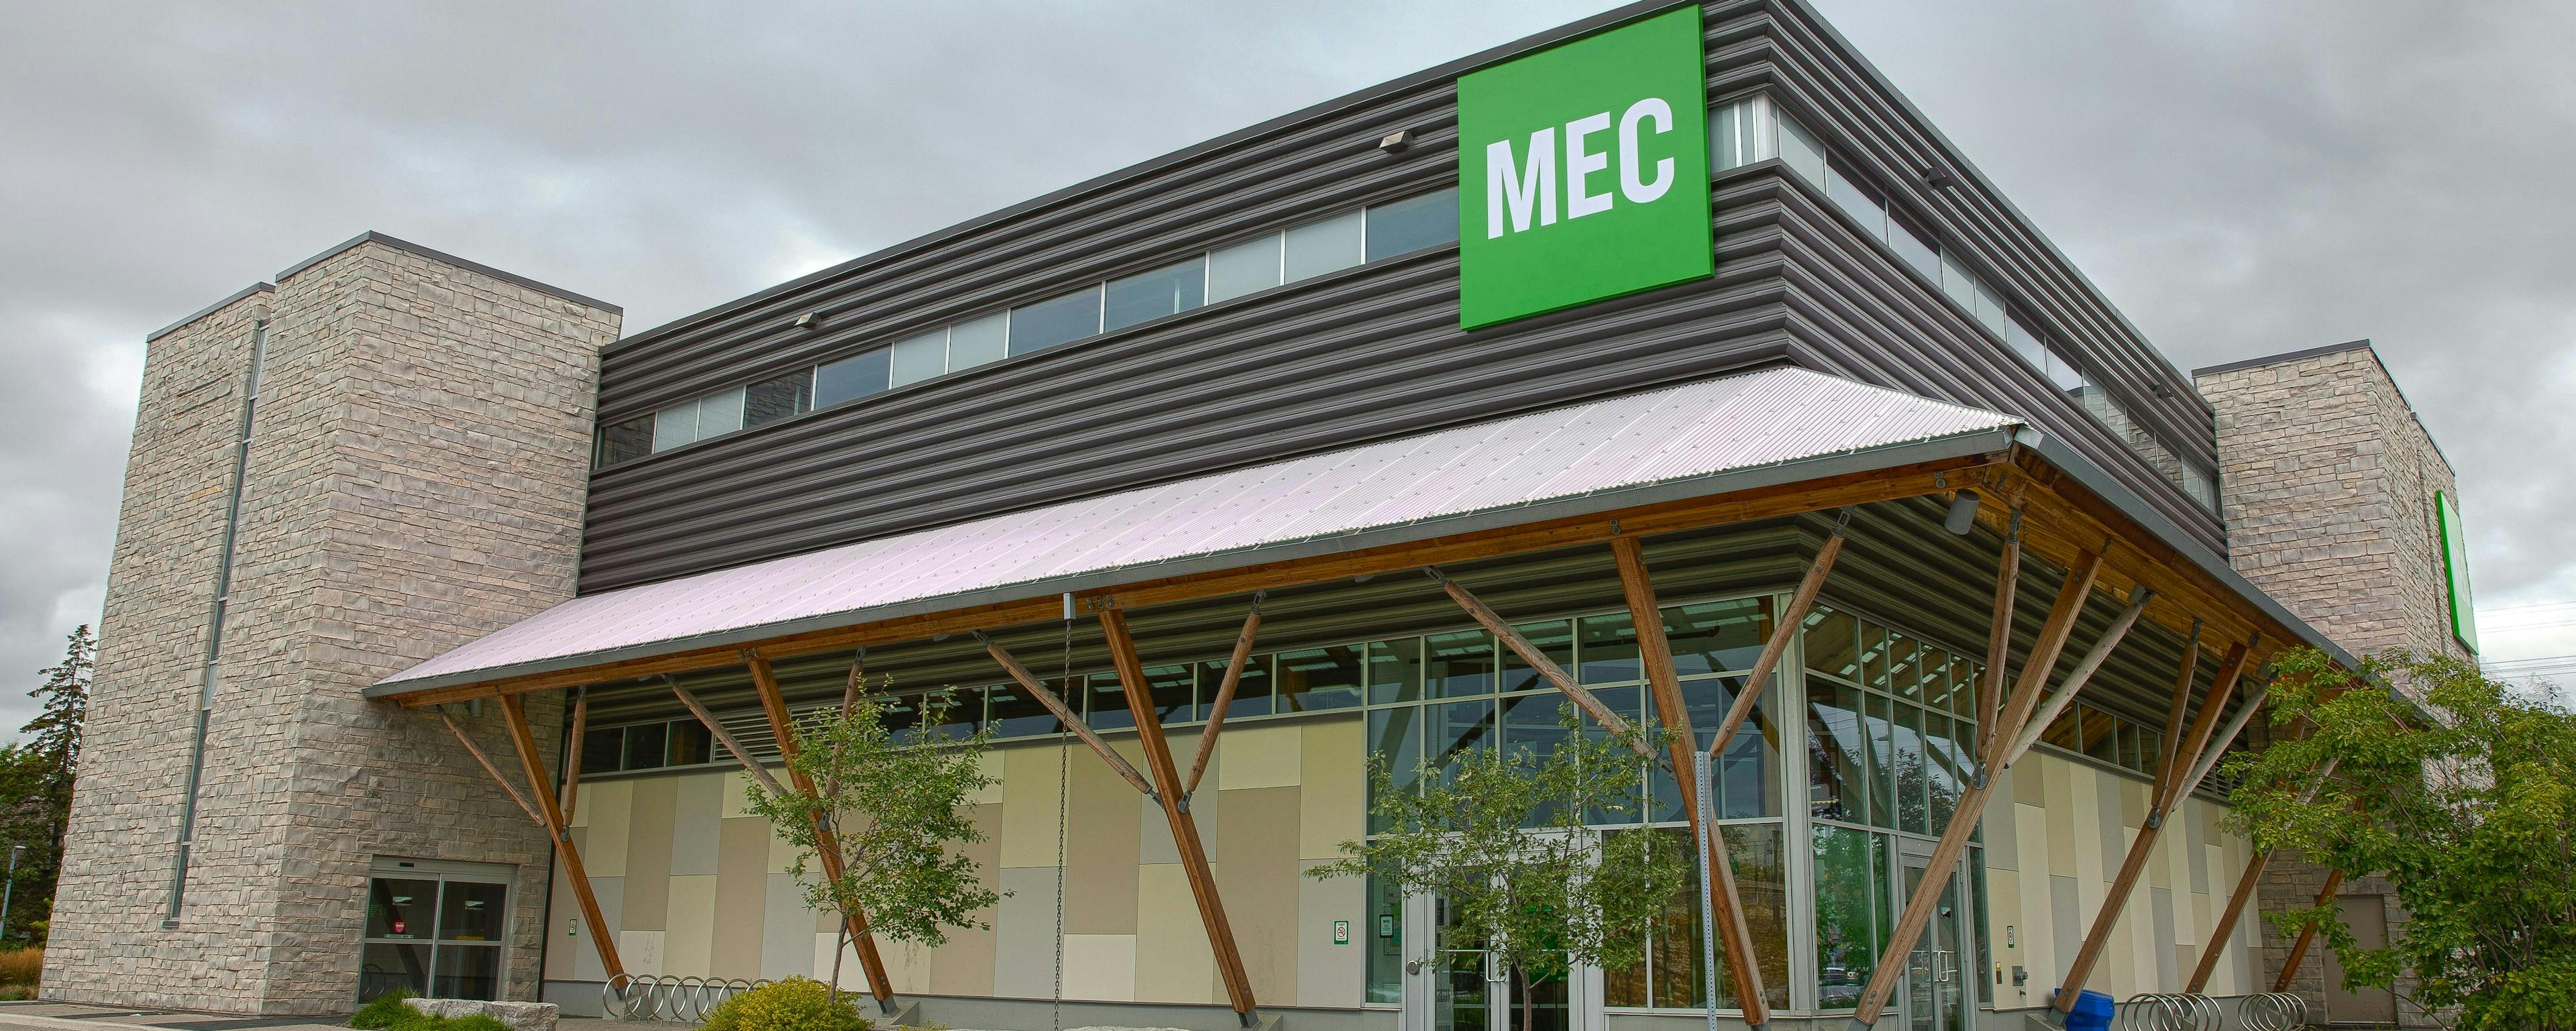 If you love trails, snow, water or fresh air, this is your store. Visit MEC Burlington for outdoor gear, know-how and inspiration.